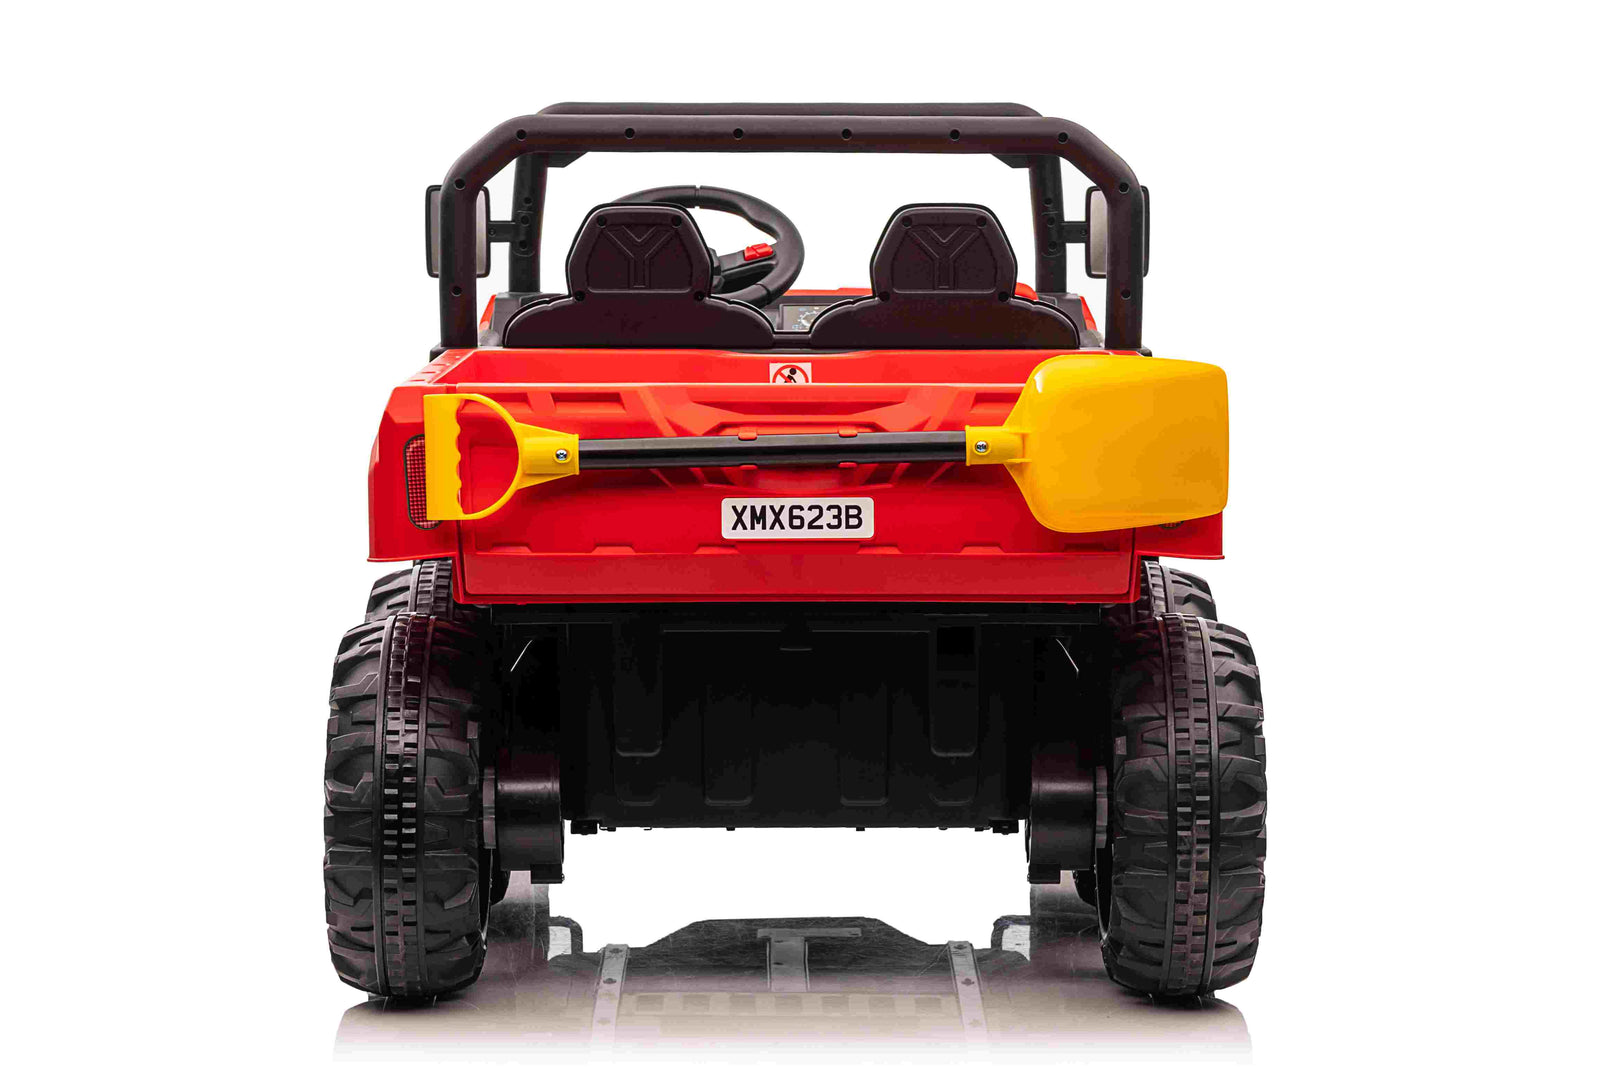 OutdoorToys 12V Electric 6-Wheel 4WD Ride On Tipper Truck